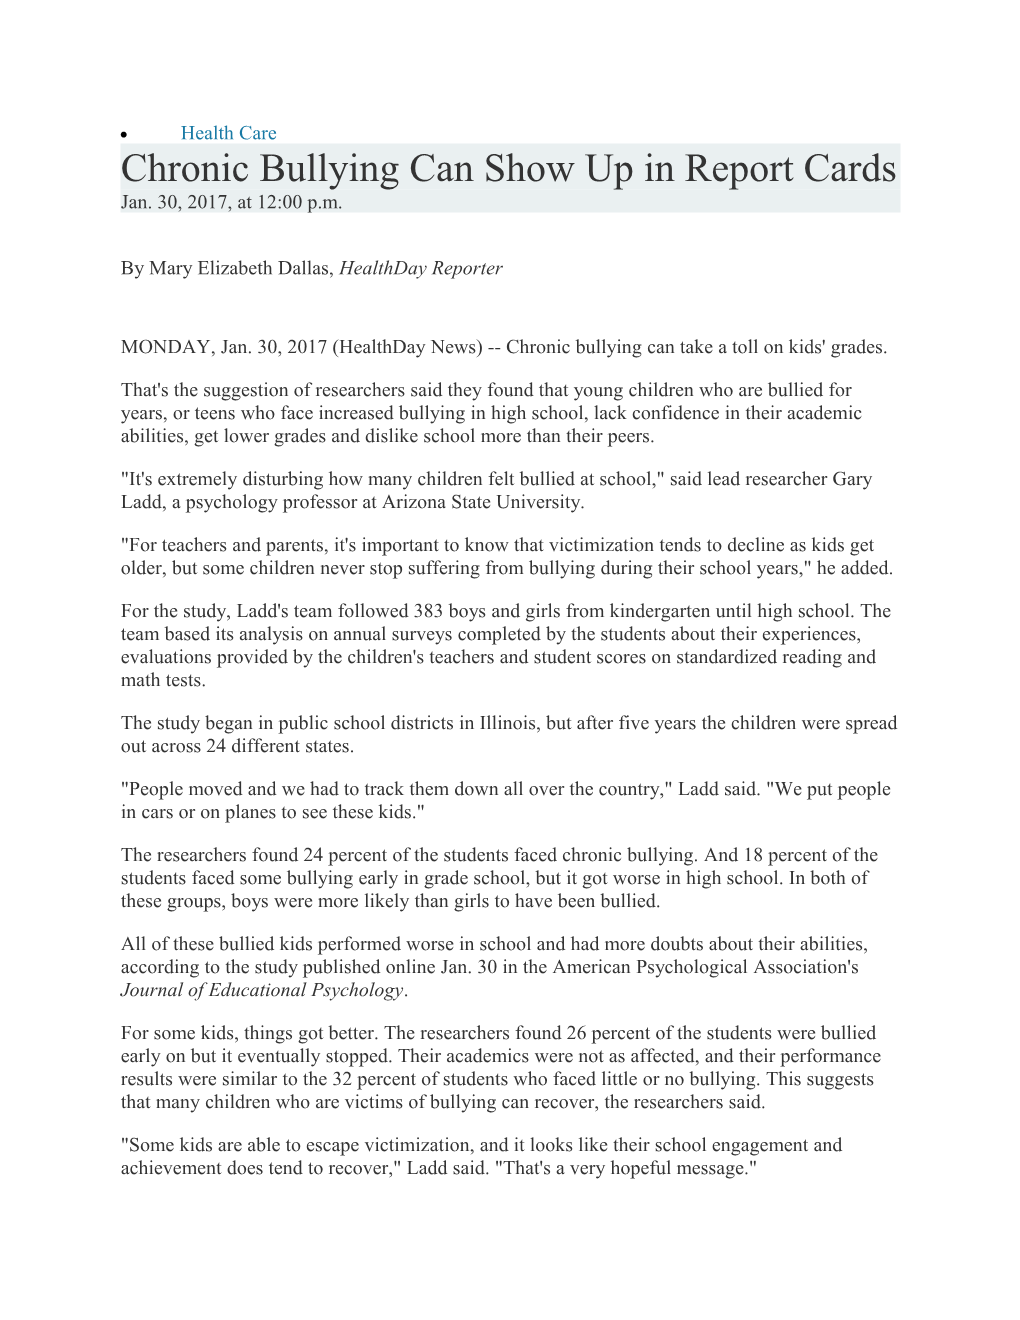 Chronic Bullying Can Show up in Report Cards